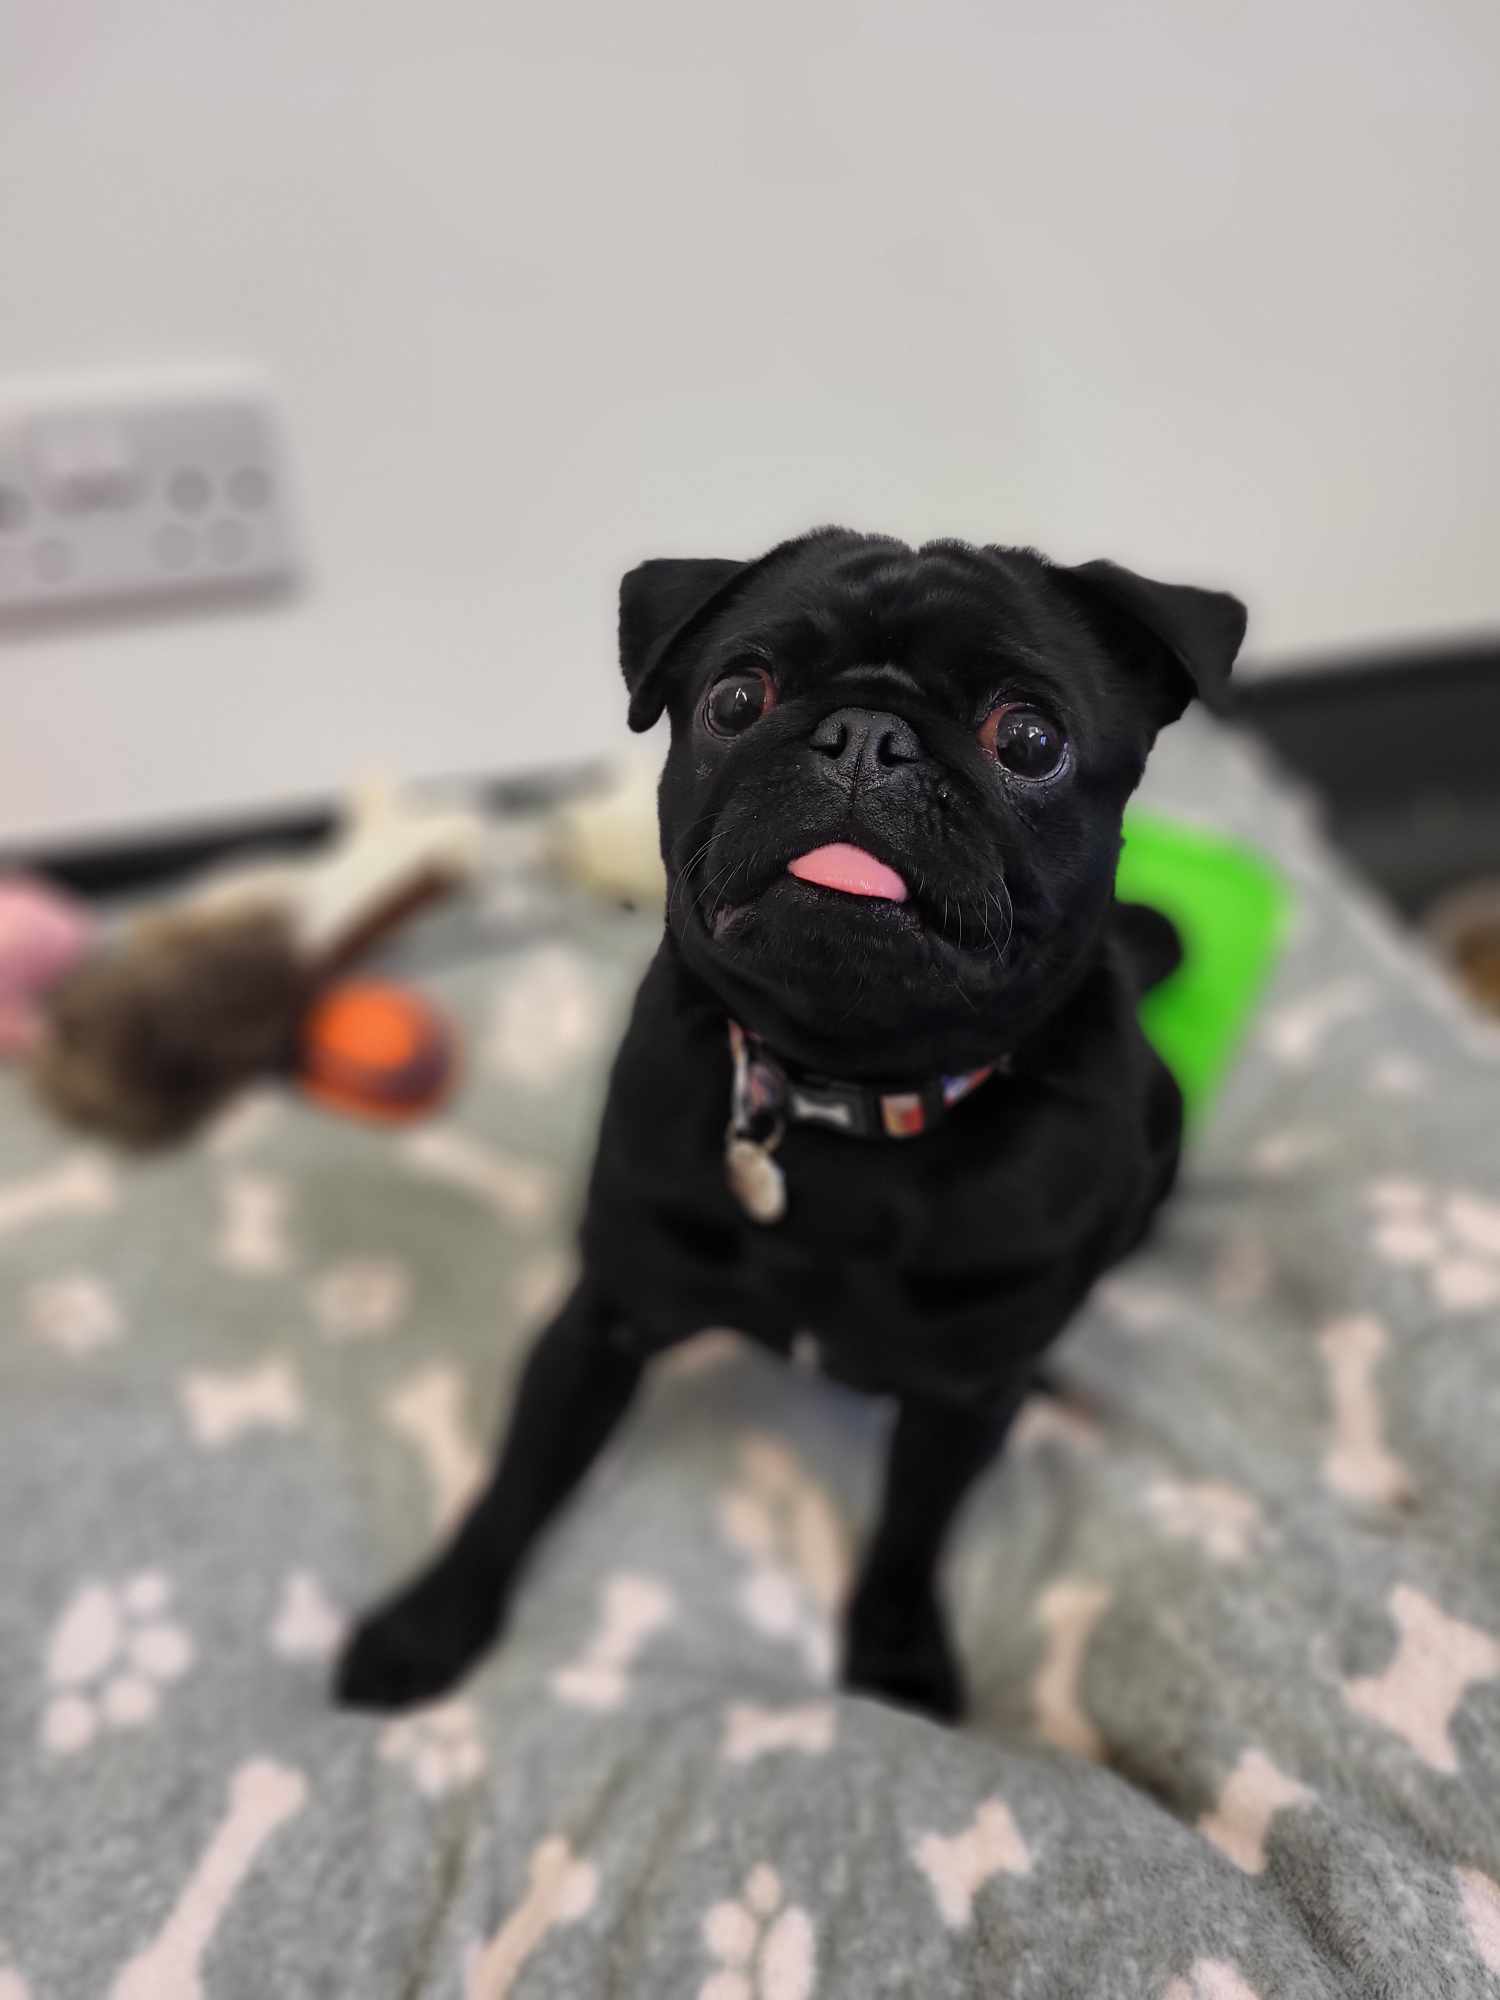 Can you help Chilli the pug get the surgery she needs?